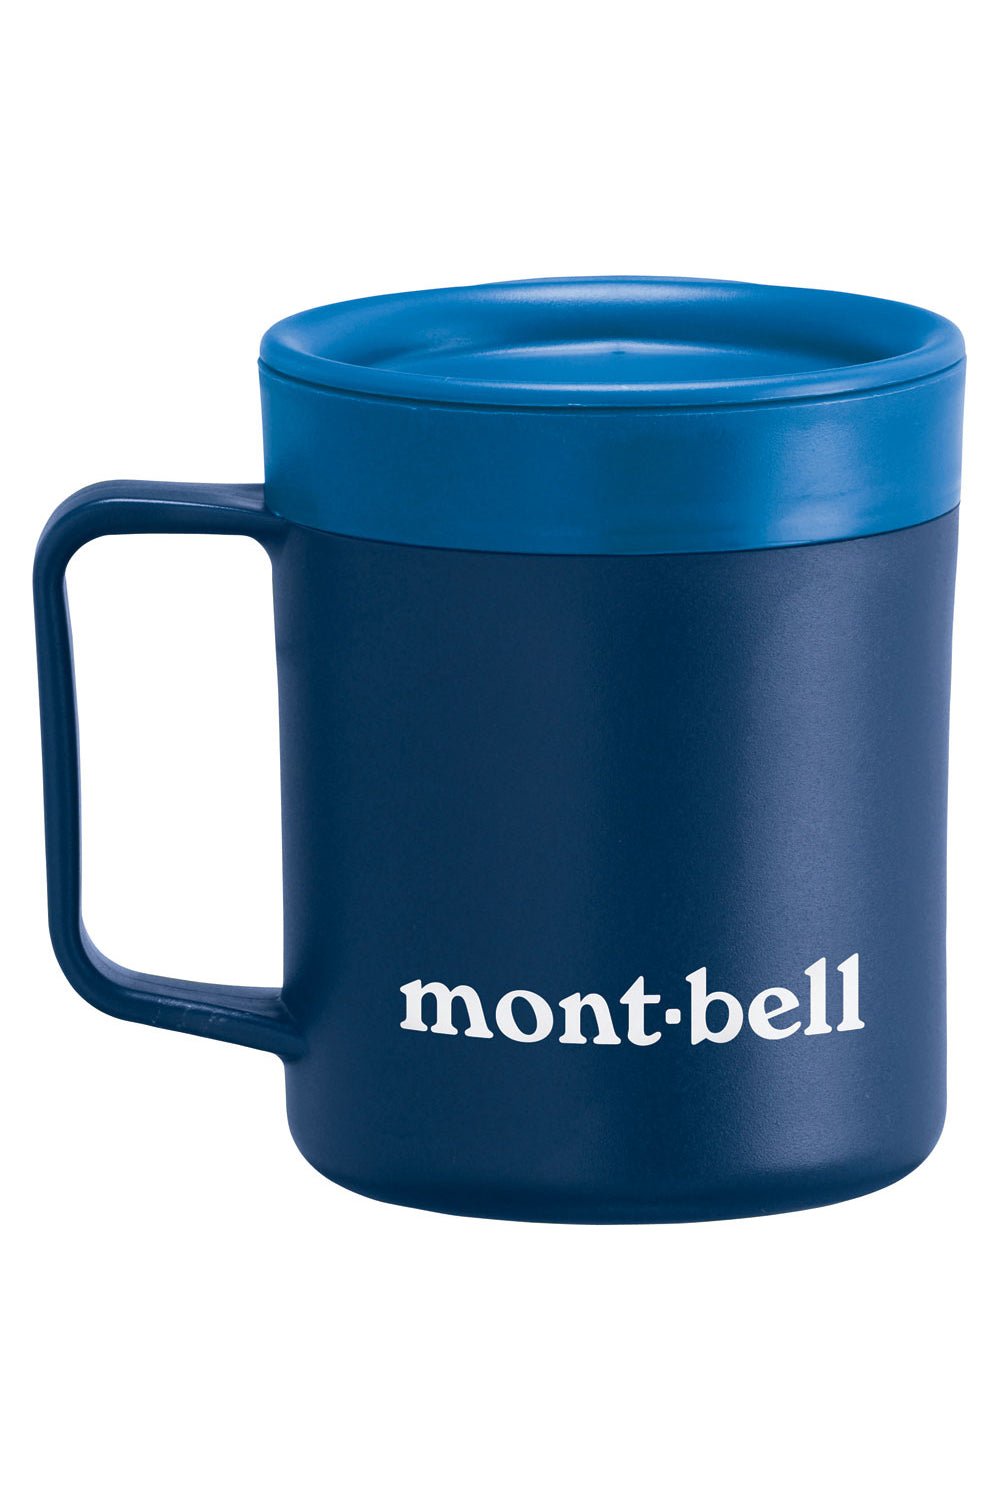 Montbell Thermo Mug 200 - Royal Blue | Coffee Outdoors